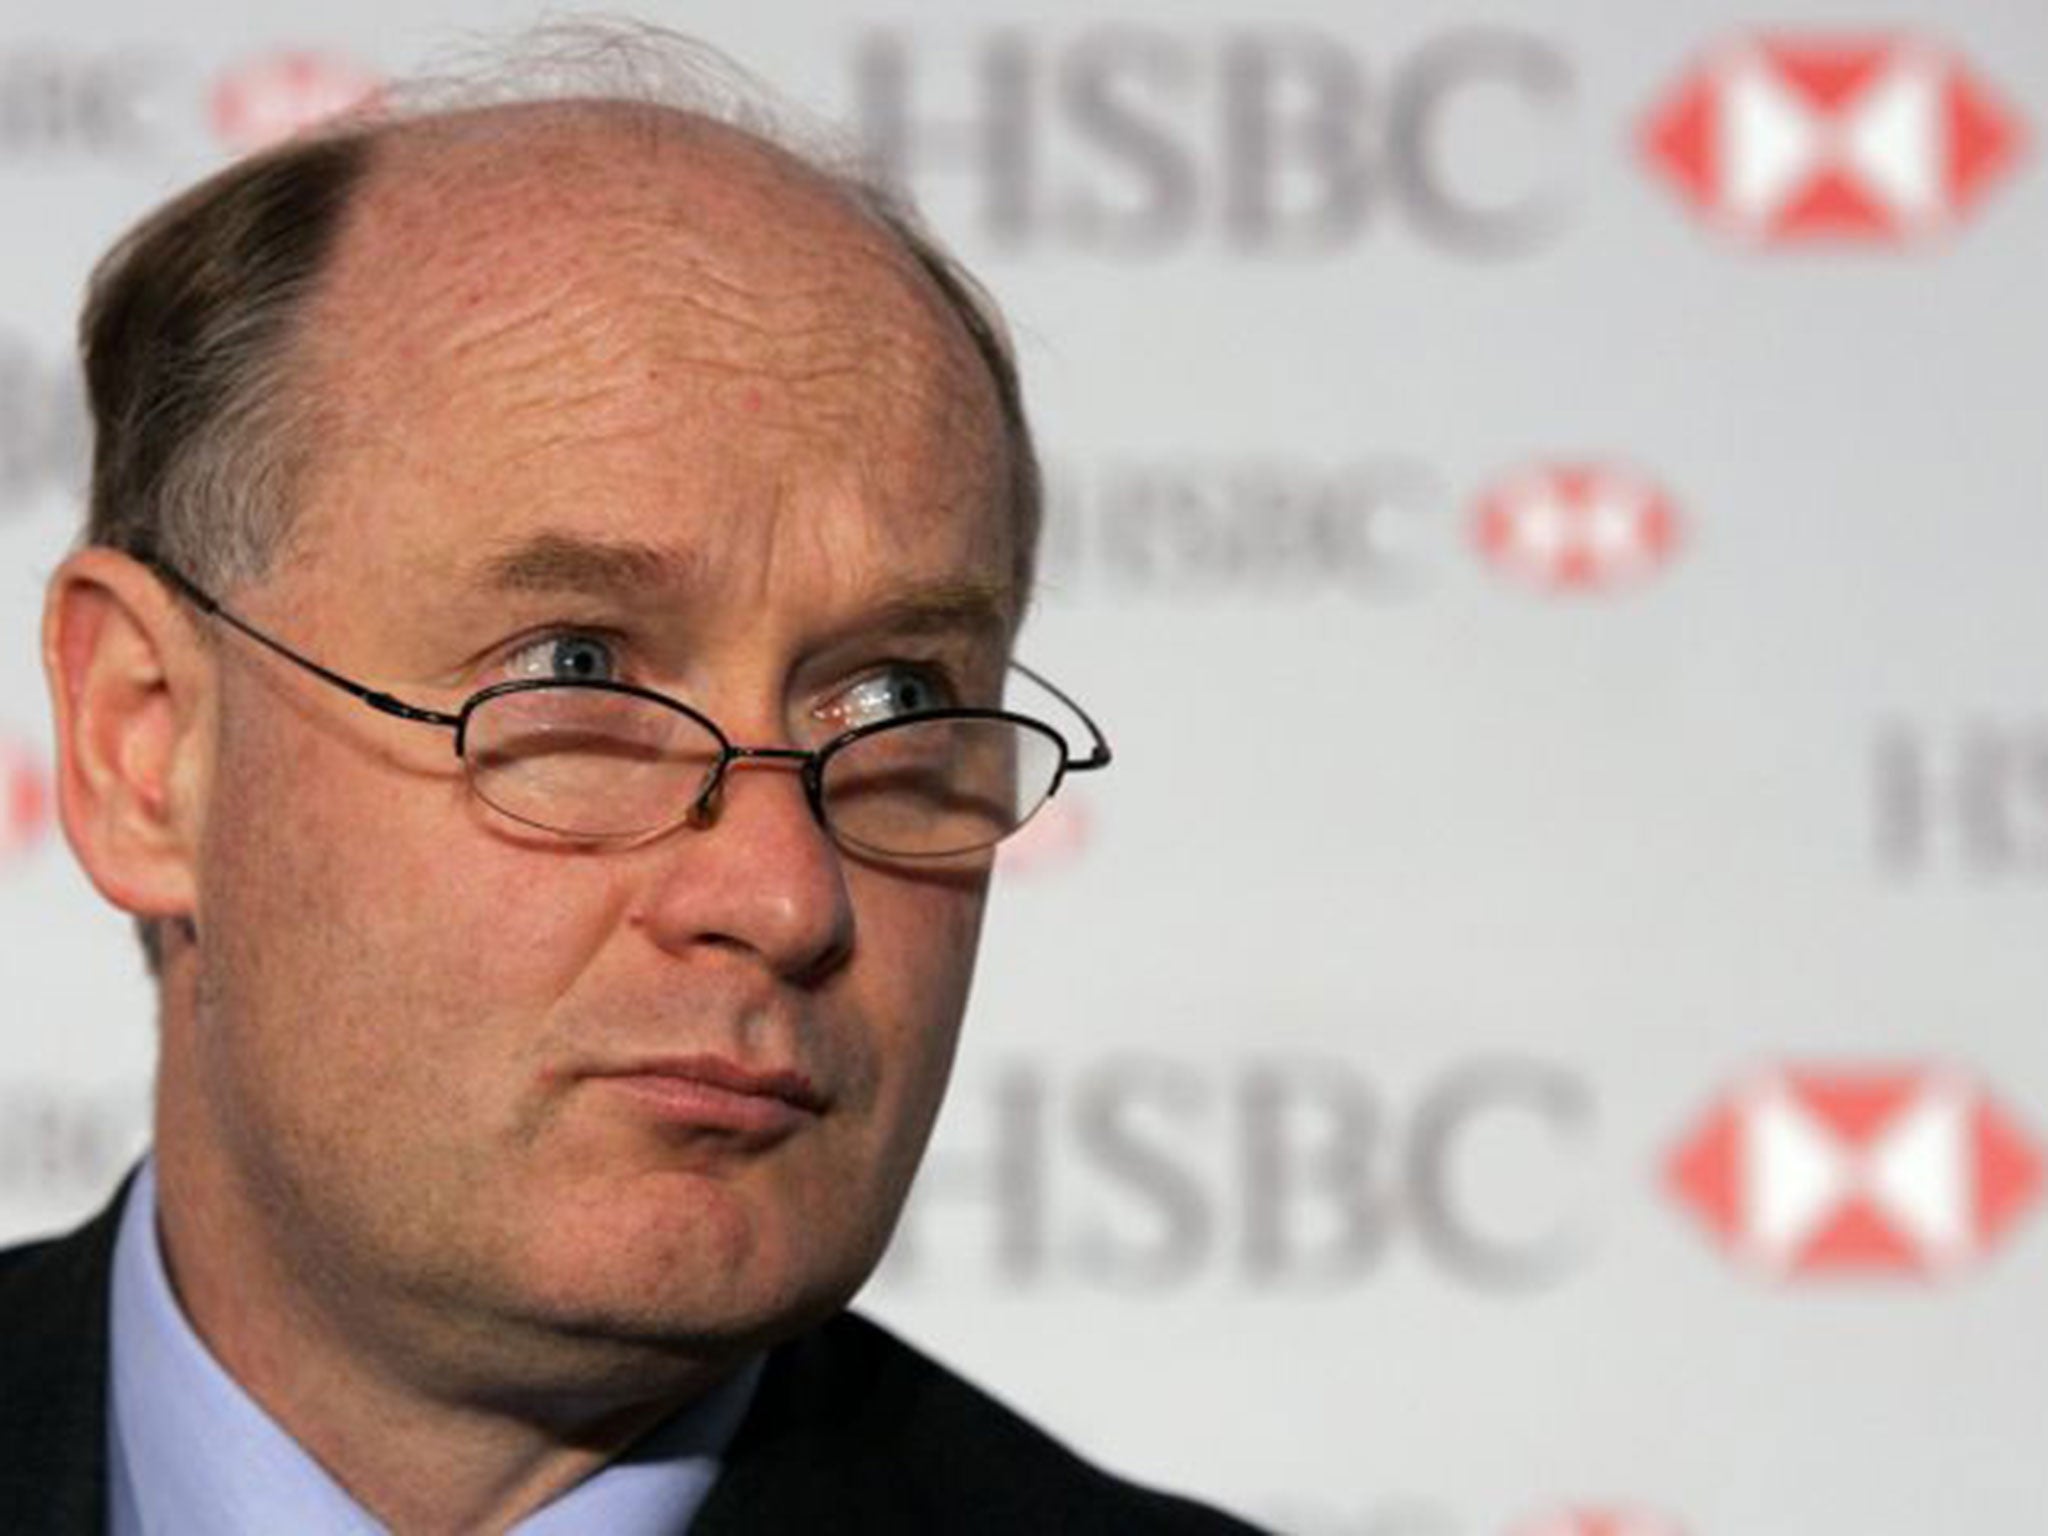 HSBC chairman Douglas Flint says the ‘best answer’ for the bank is for the UK to stay in a reformed EU